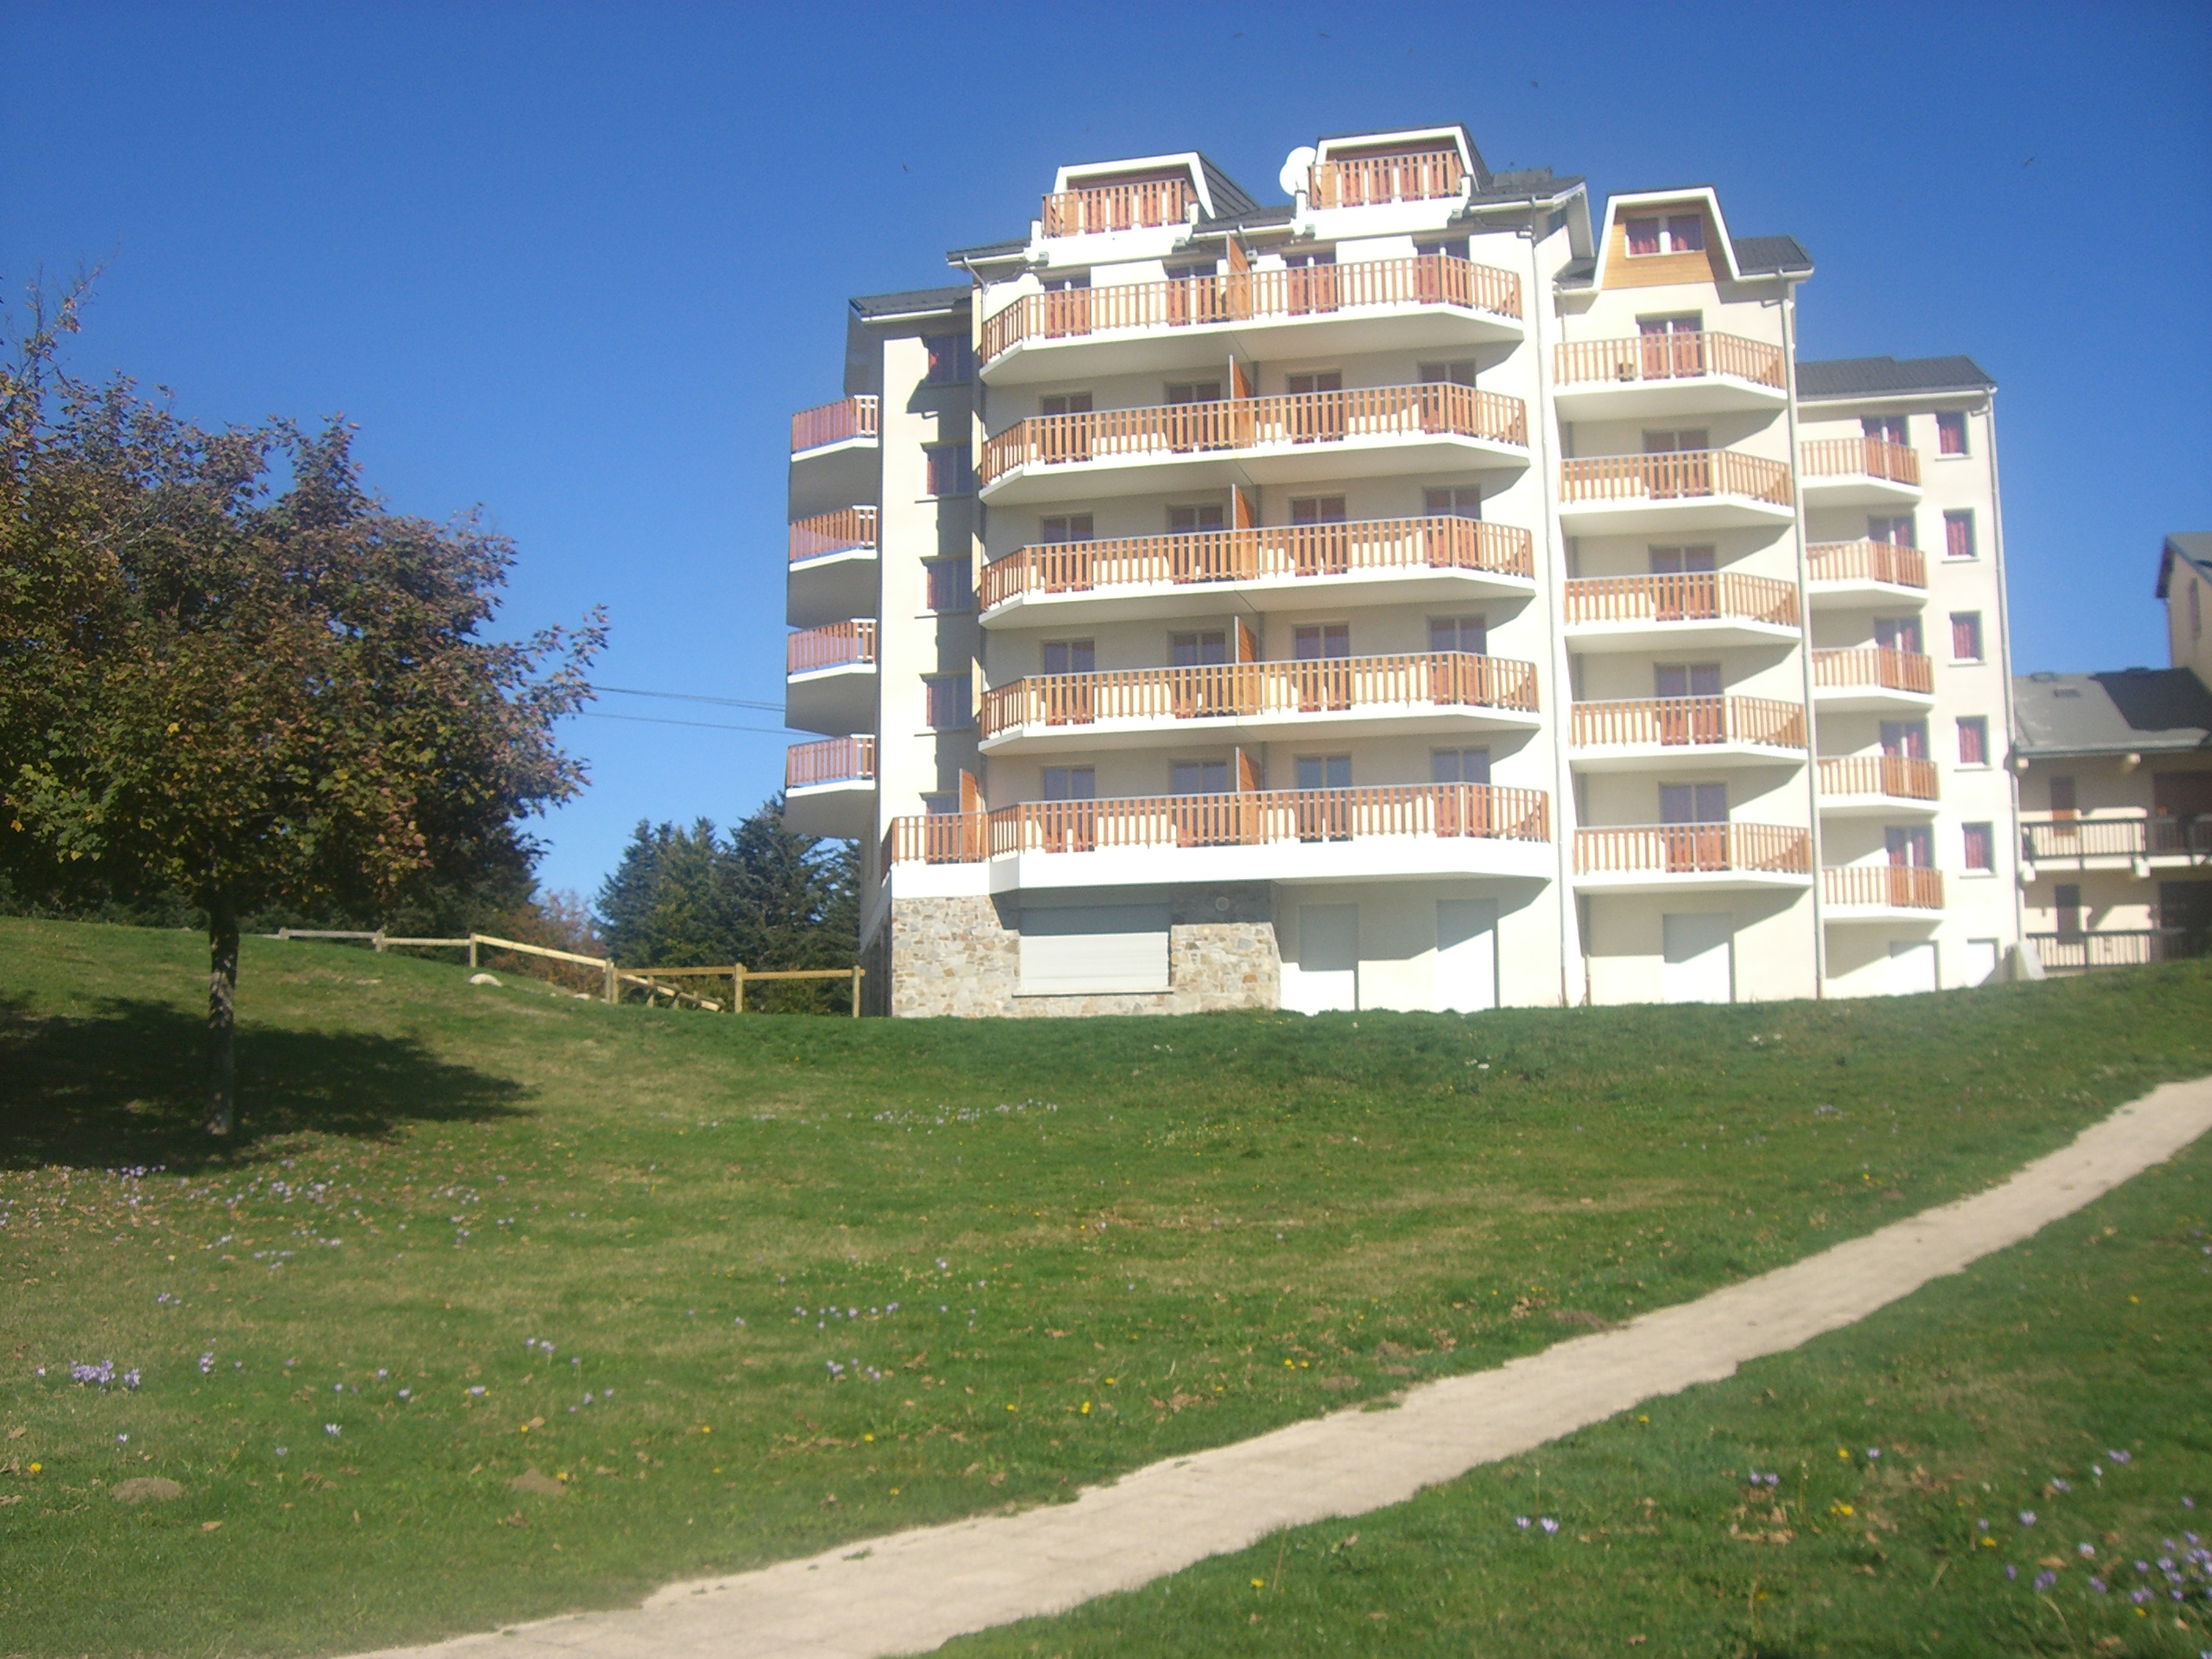 Residence Les Balcons d'Ax (Ax Les Thermes - Ariege Pyrenees) - Exterior